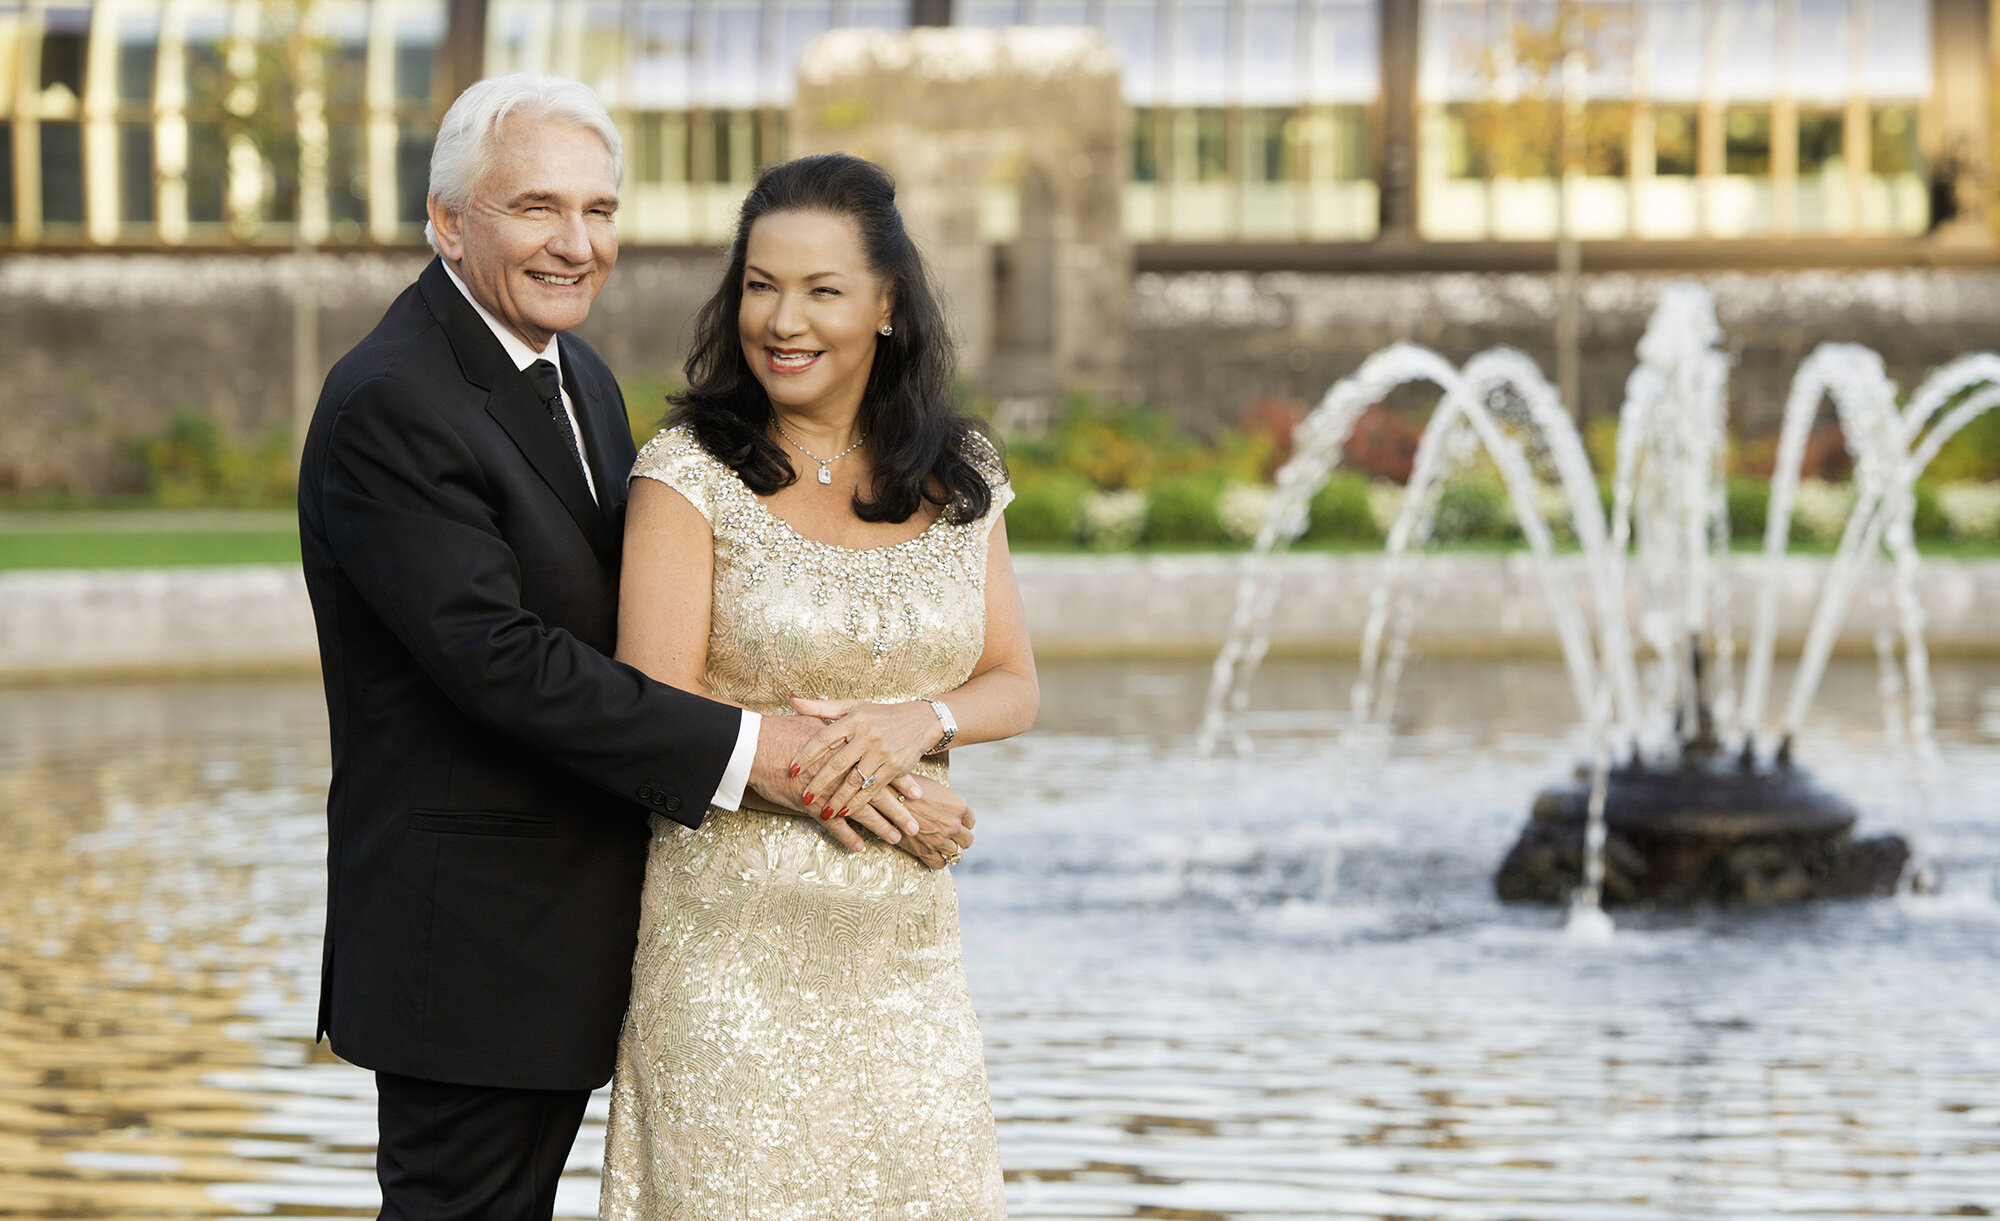  On Sunday, October 25th, 2015, the occasion of her 60th birthday, Michelle Anne Hussey became engaged to David Aloysius Banmiller, surrounded by select family and friends. The Ashford Castle in County Mayo, Ireland, provided the perfect romantic set